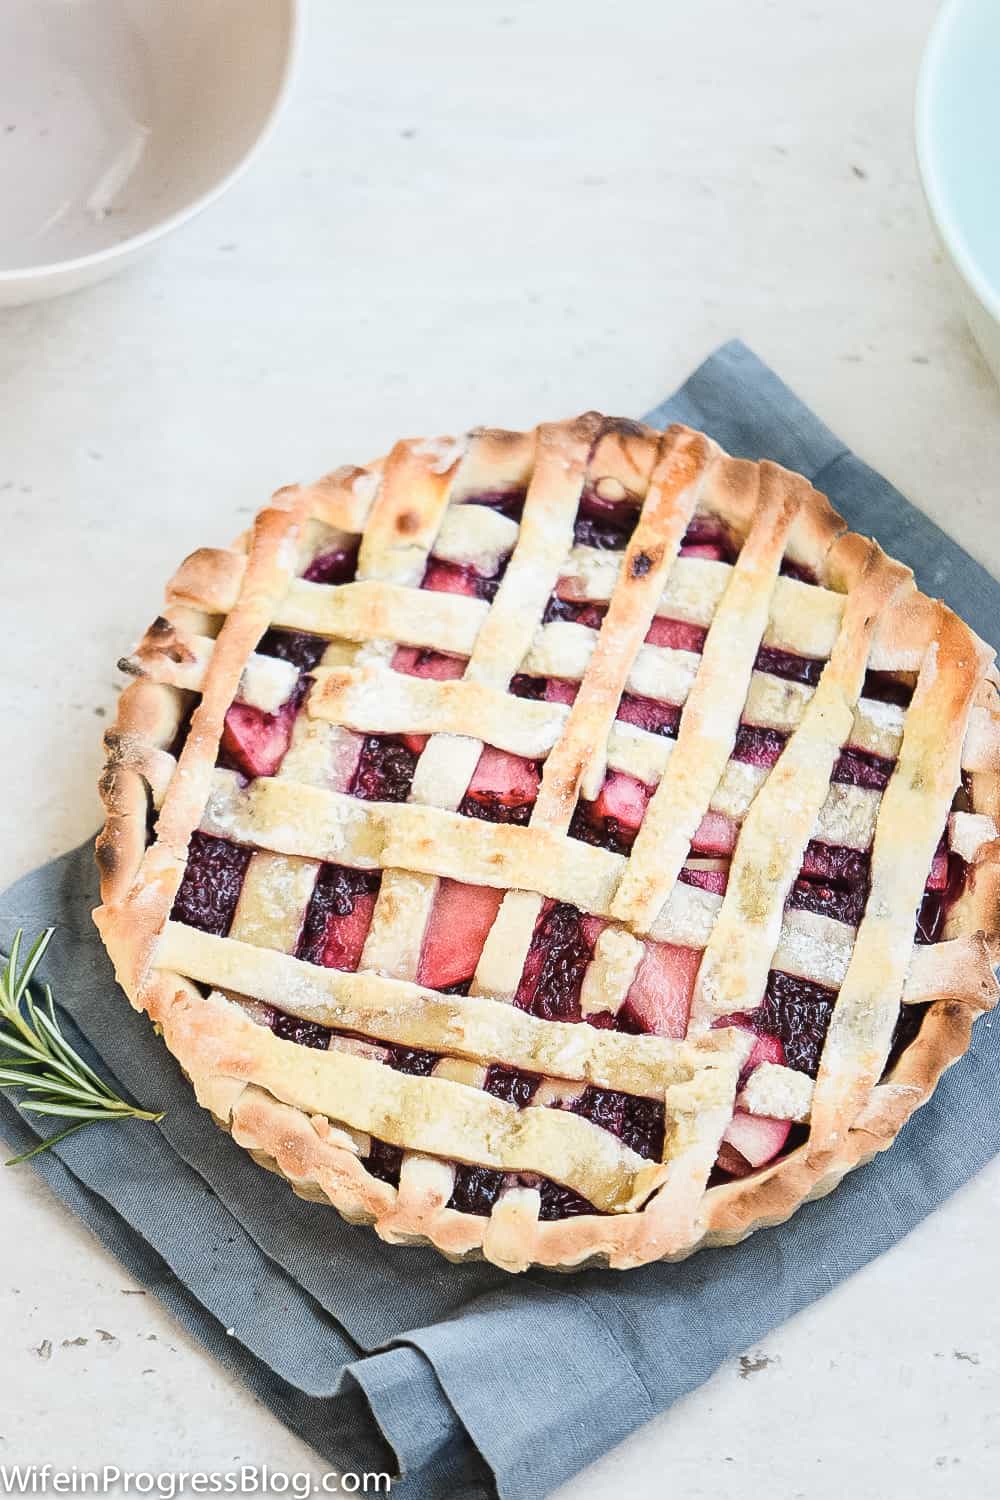 rustic pie filled with blackberries and apples